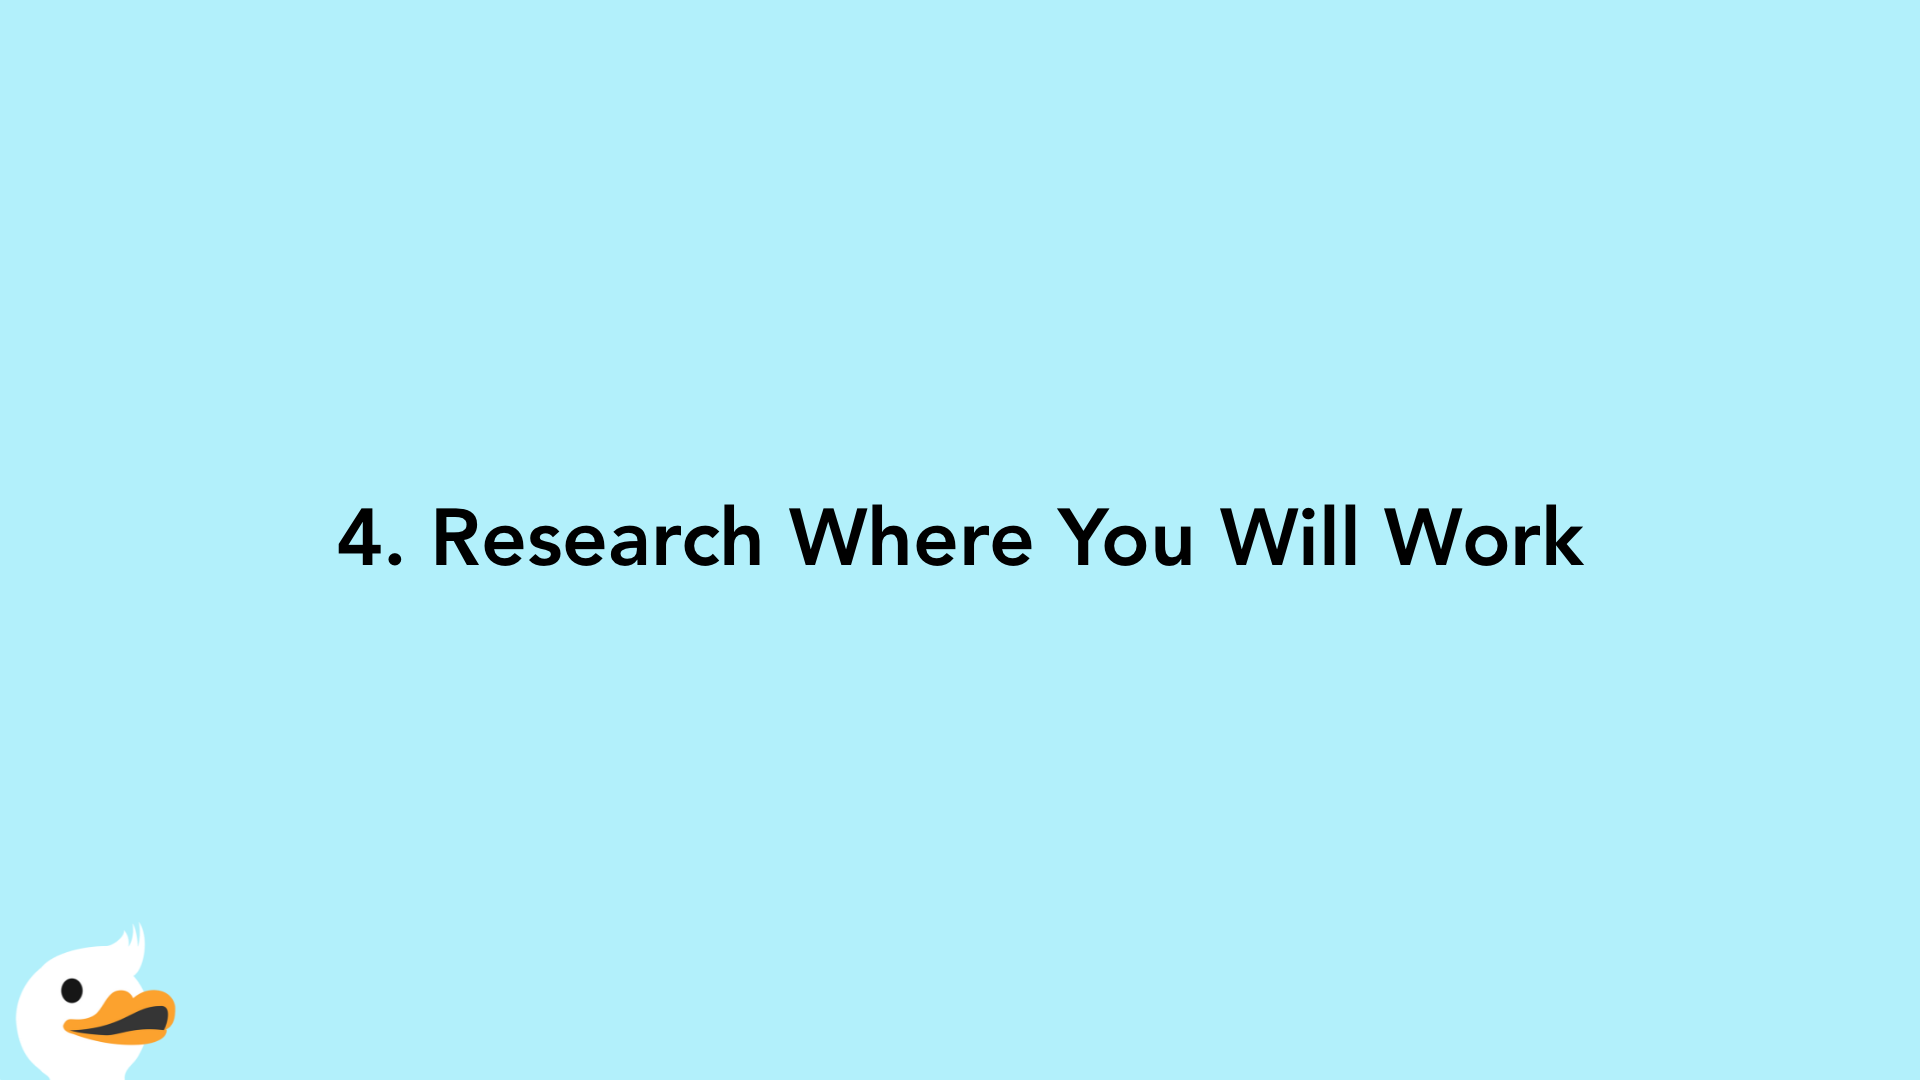 4. Research Where You Will Work